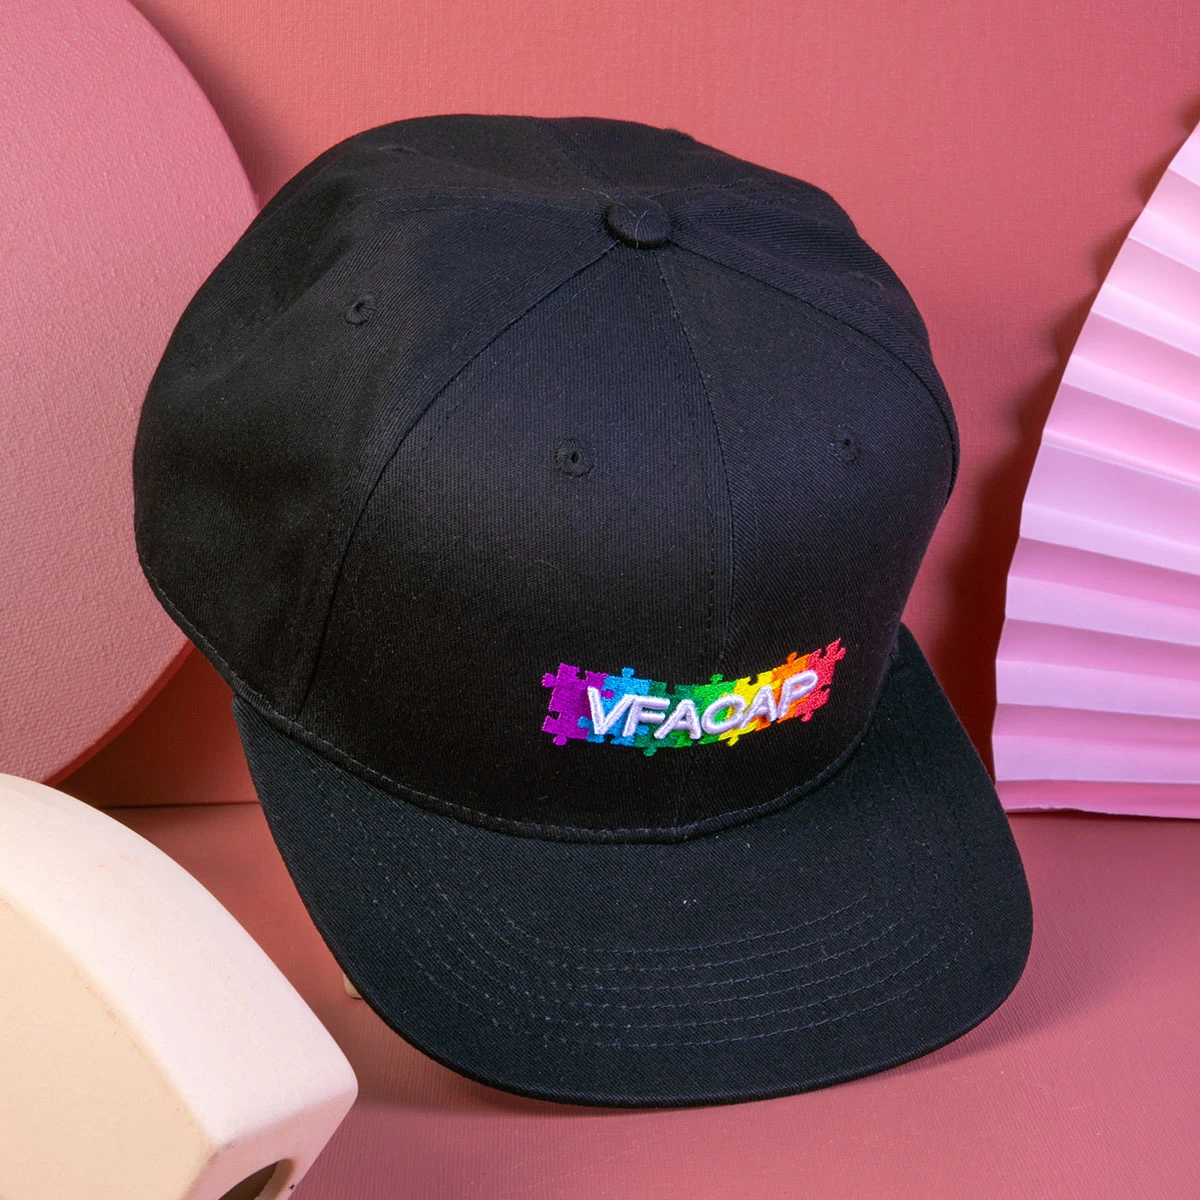 China design letters embroidery vfacap snapback hats factory manufacturer